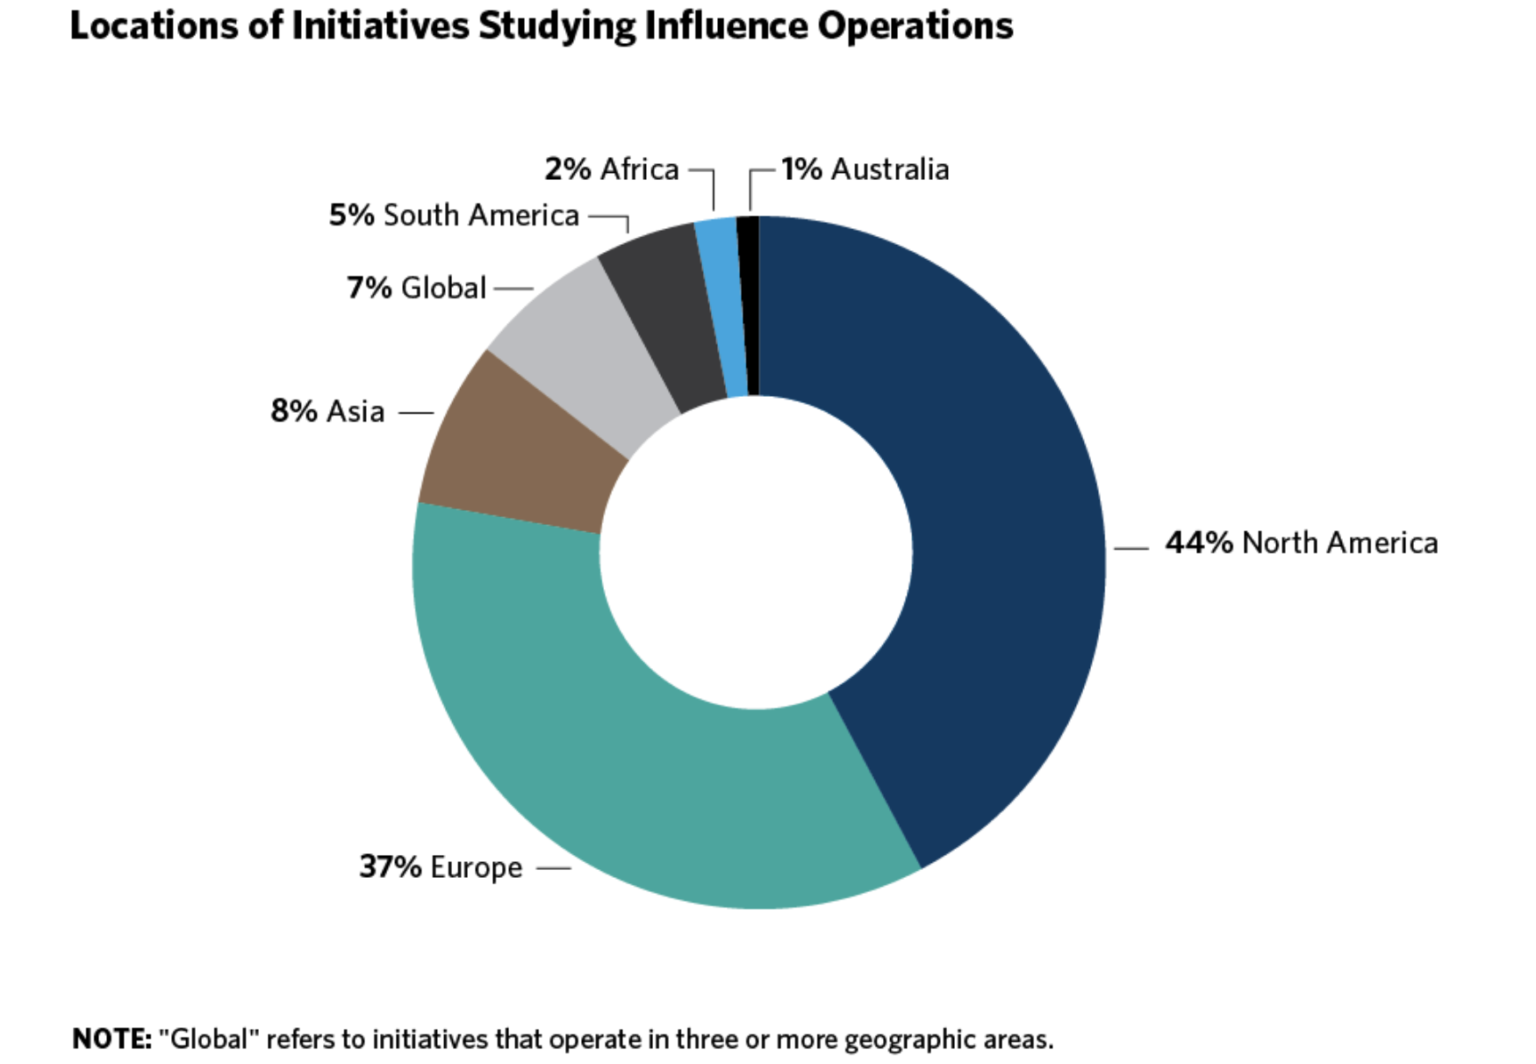 Location of Initiatives Studying Influence Operations